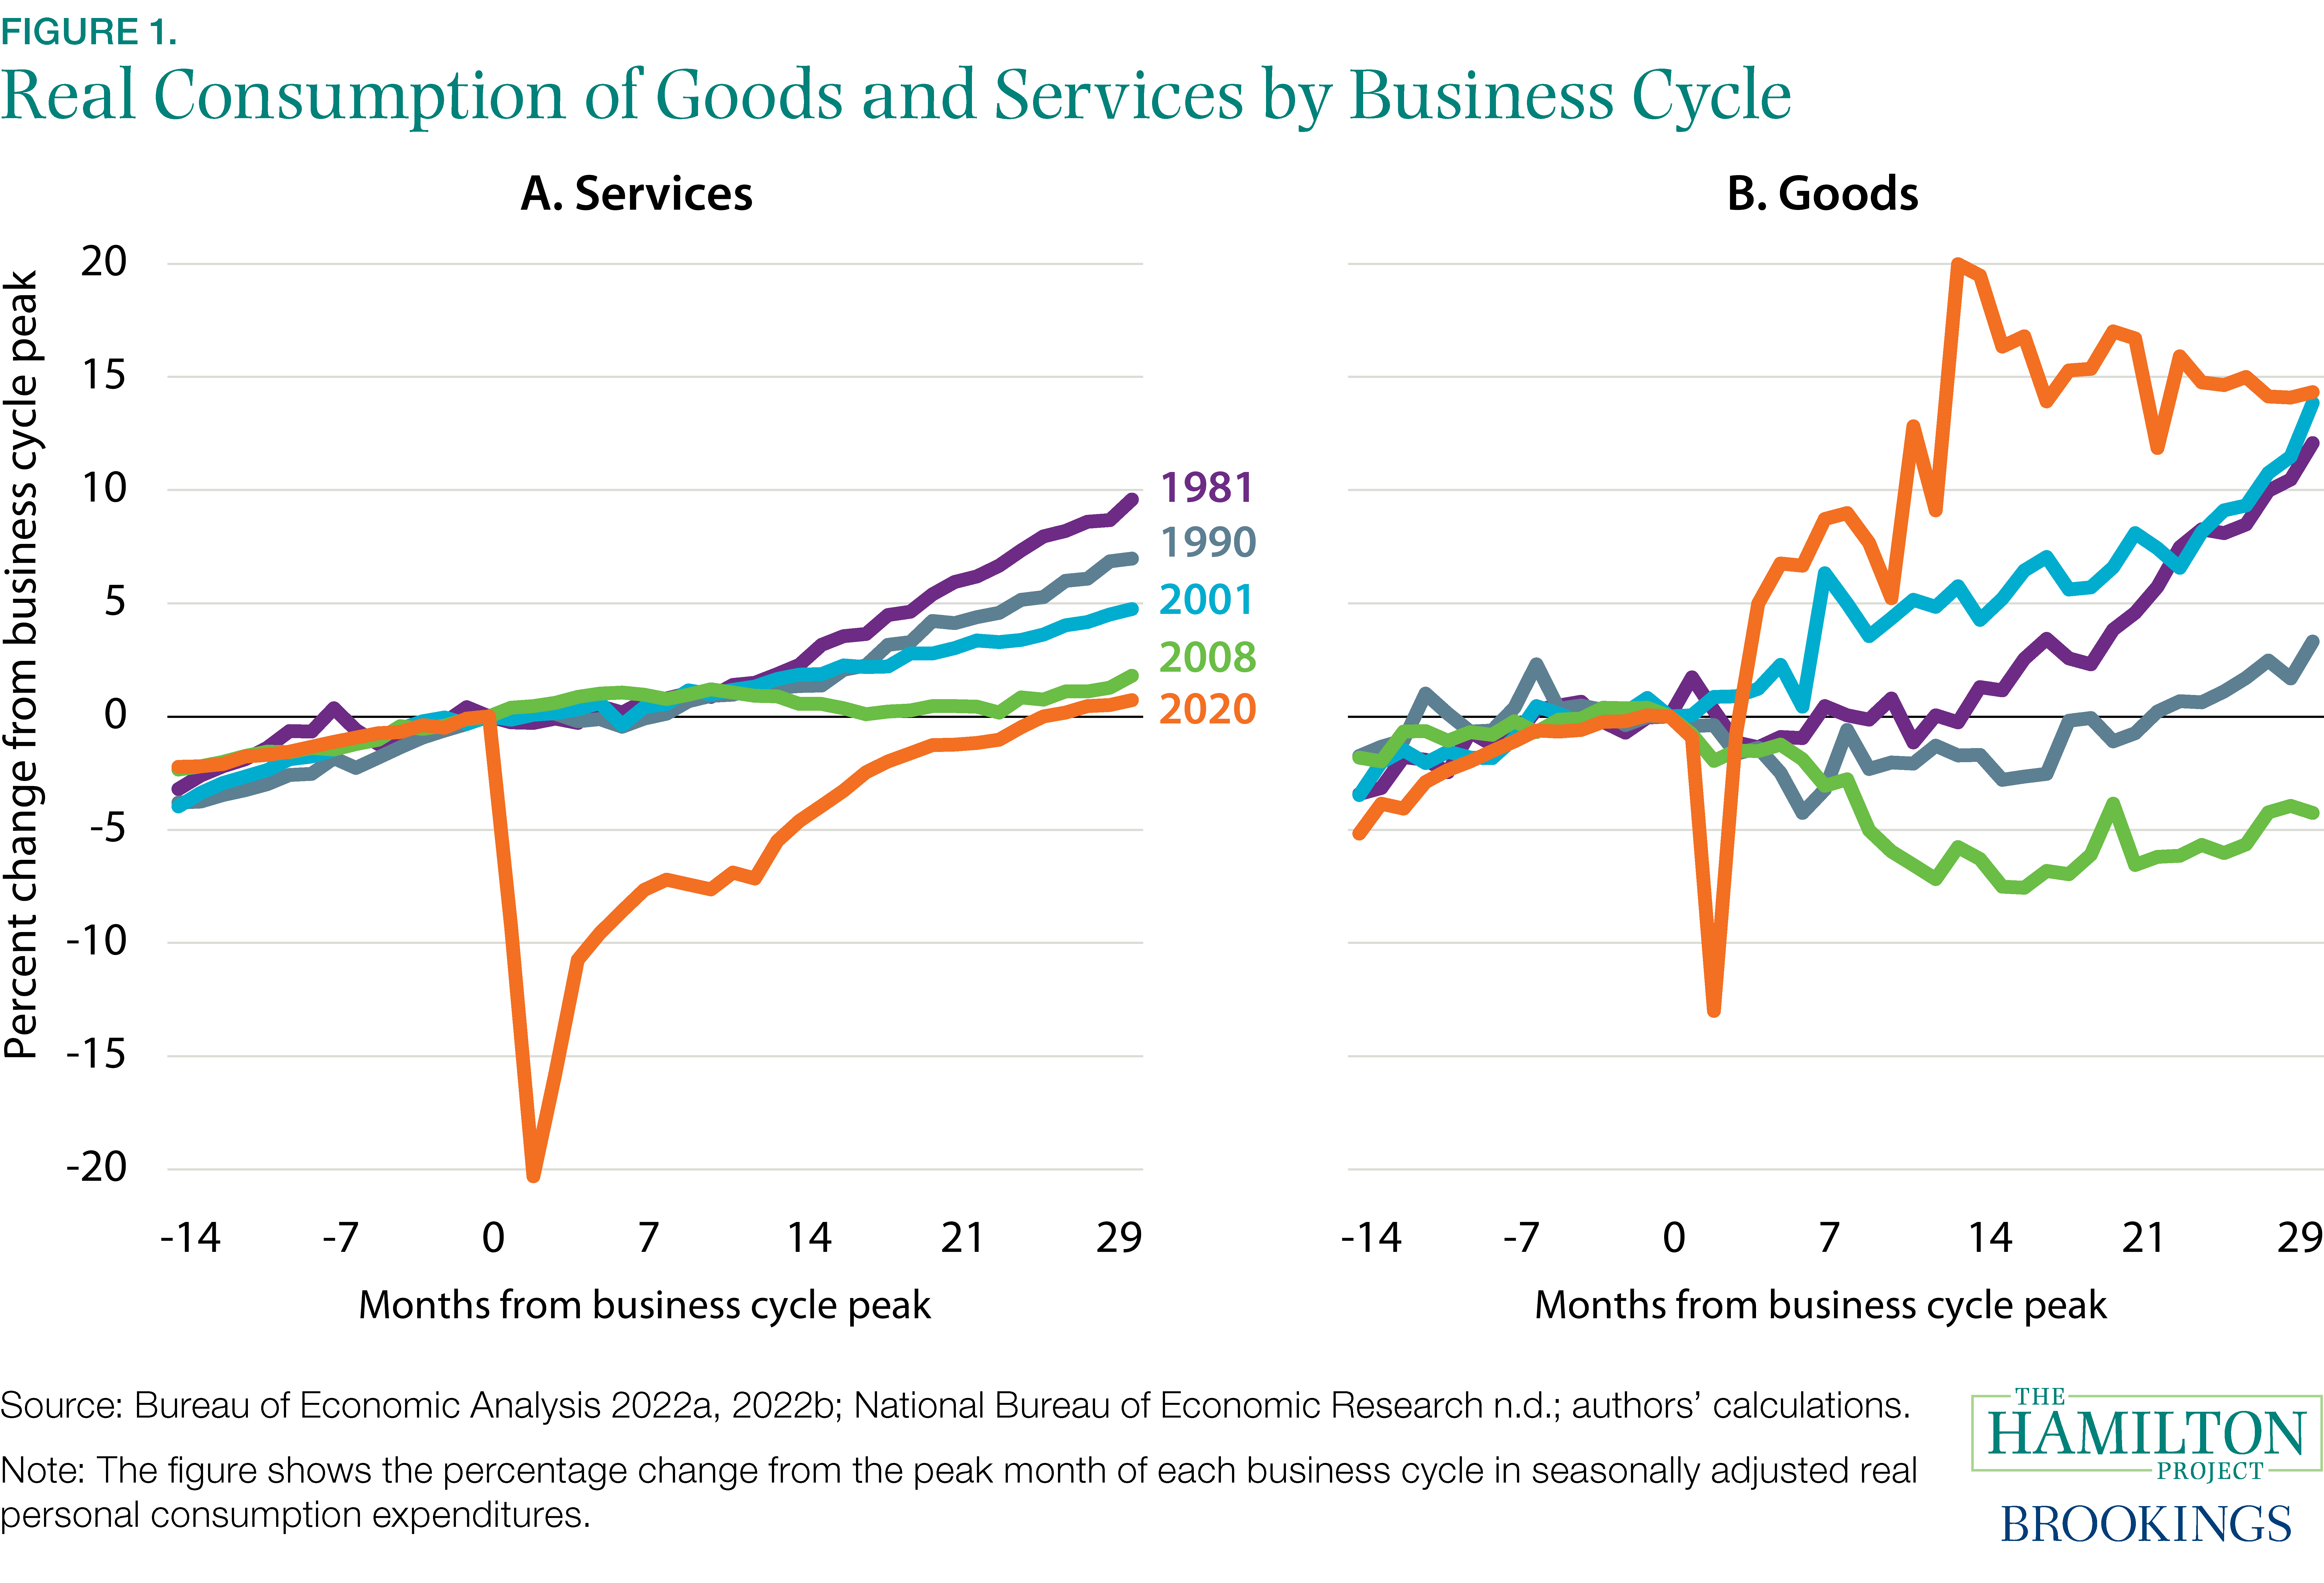 Figure 1. Real Consumption of Goods and Services by Business Cycle